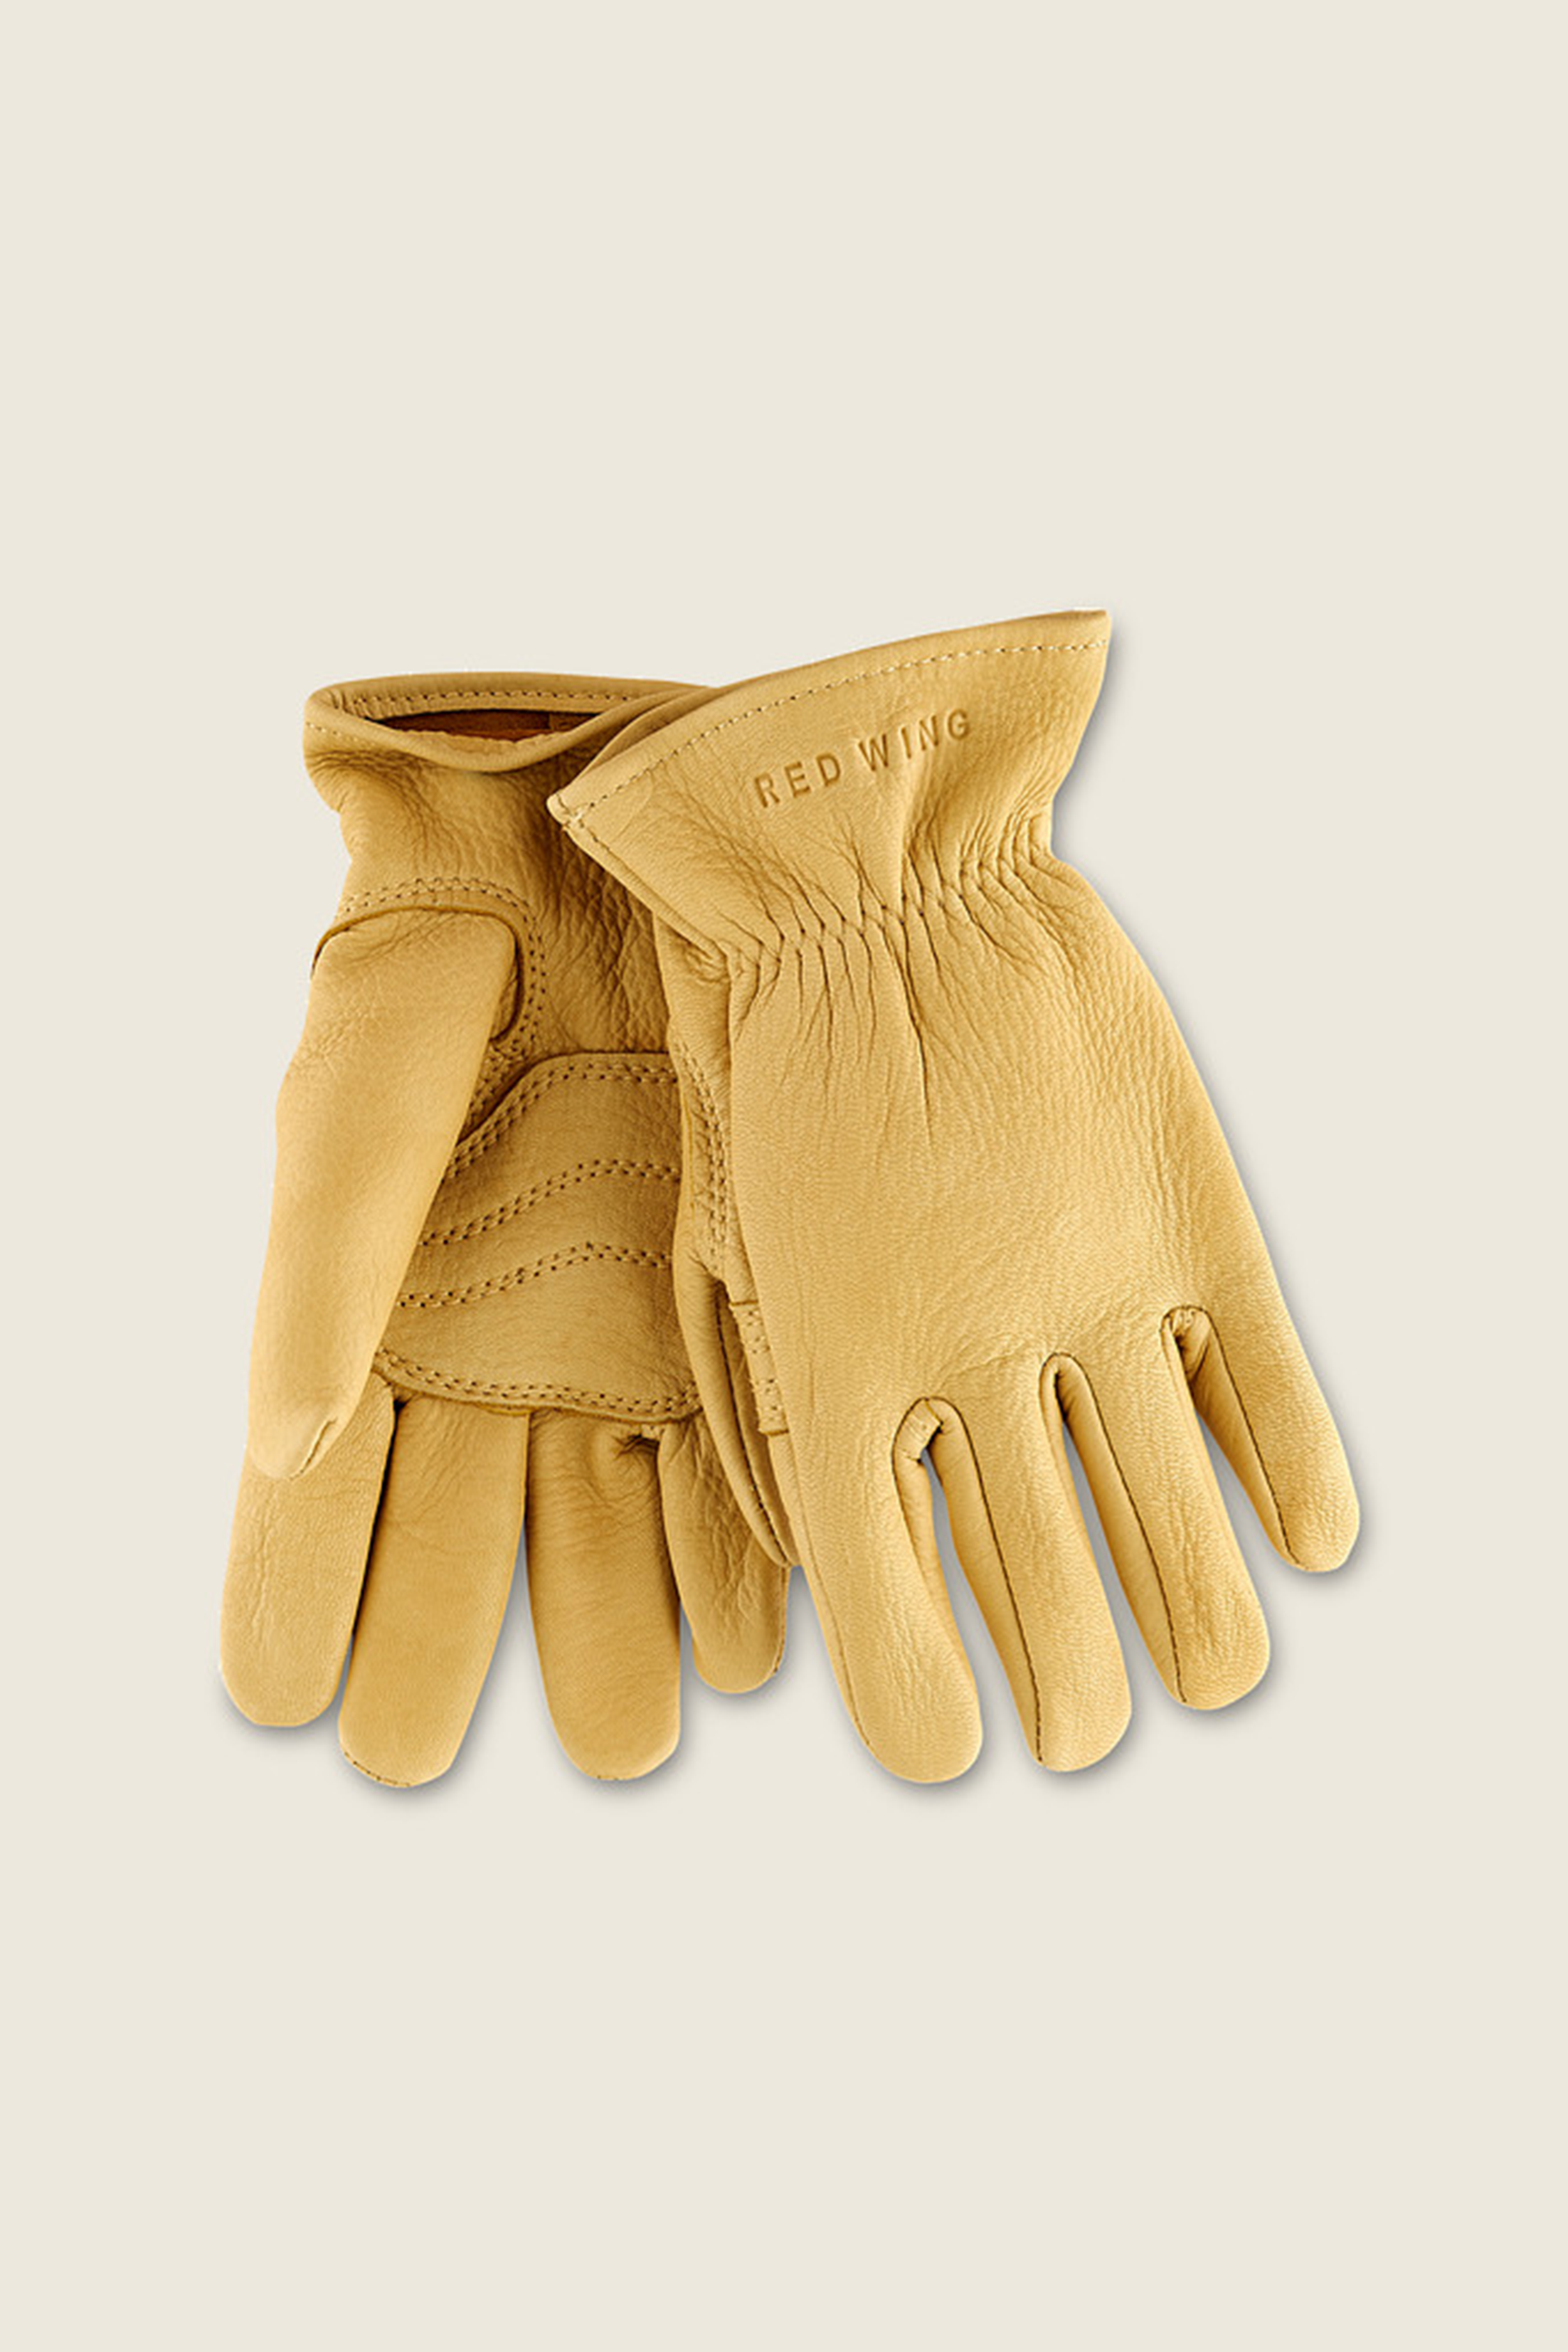 Red Wing Lined Buckskin Gloves in Yellow